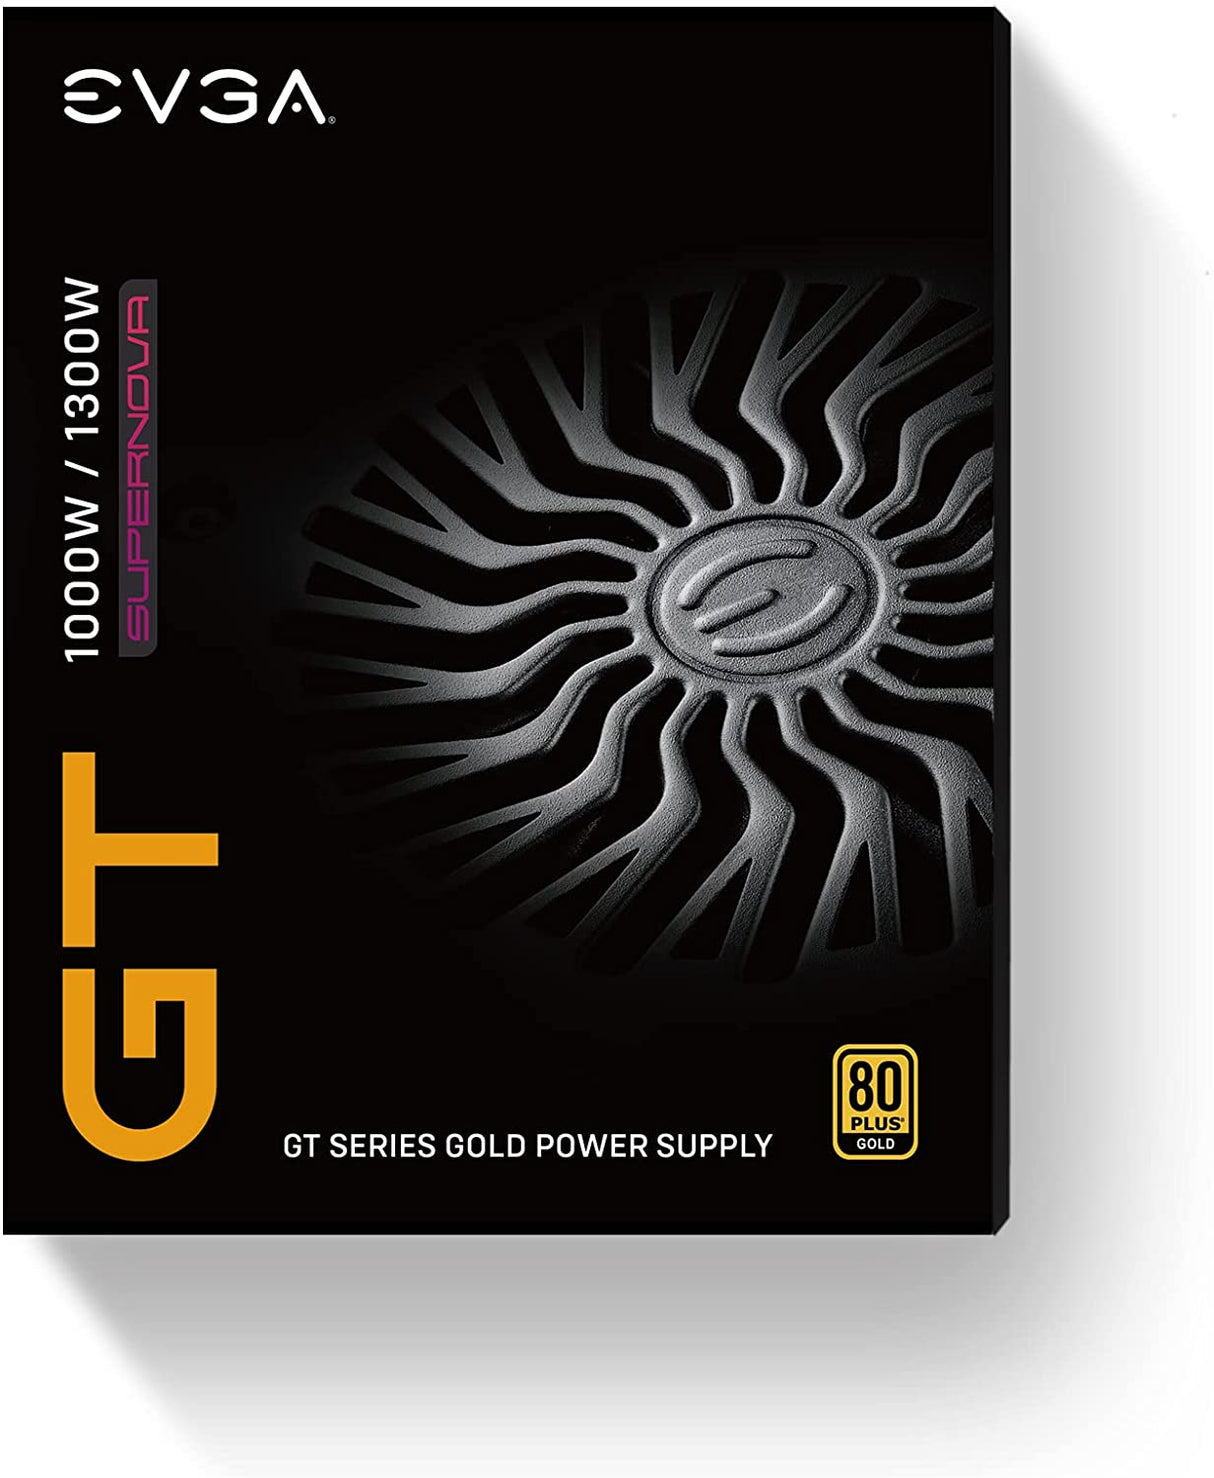 EVGA Supernova 1300 GT, 80 Plus Gold 1300W, Fully Modular, Eco Mode with FDB Fan, 10 Year Warranty, Includes Power ON Self Tester, Compact 180mm Size, Power Supply 220-GT-1300-X1